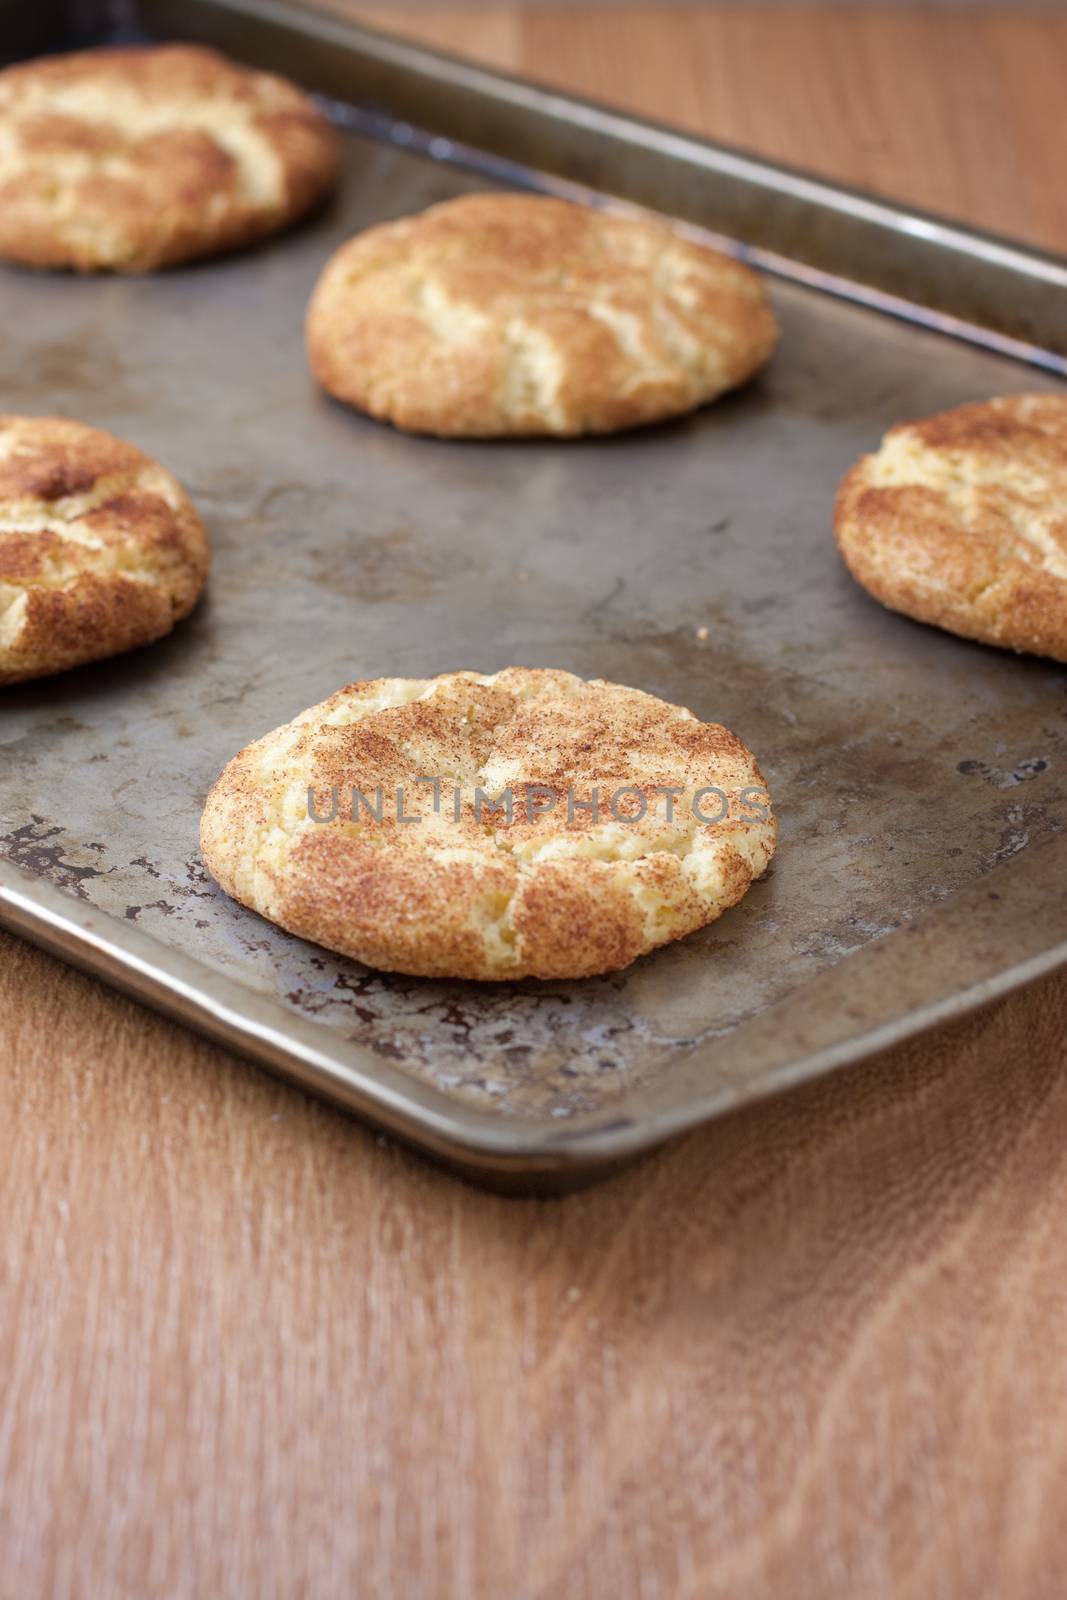 Fresh baked Snicker Doodle Cookies by SouthernLightStudios